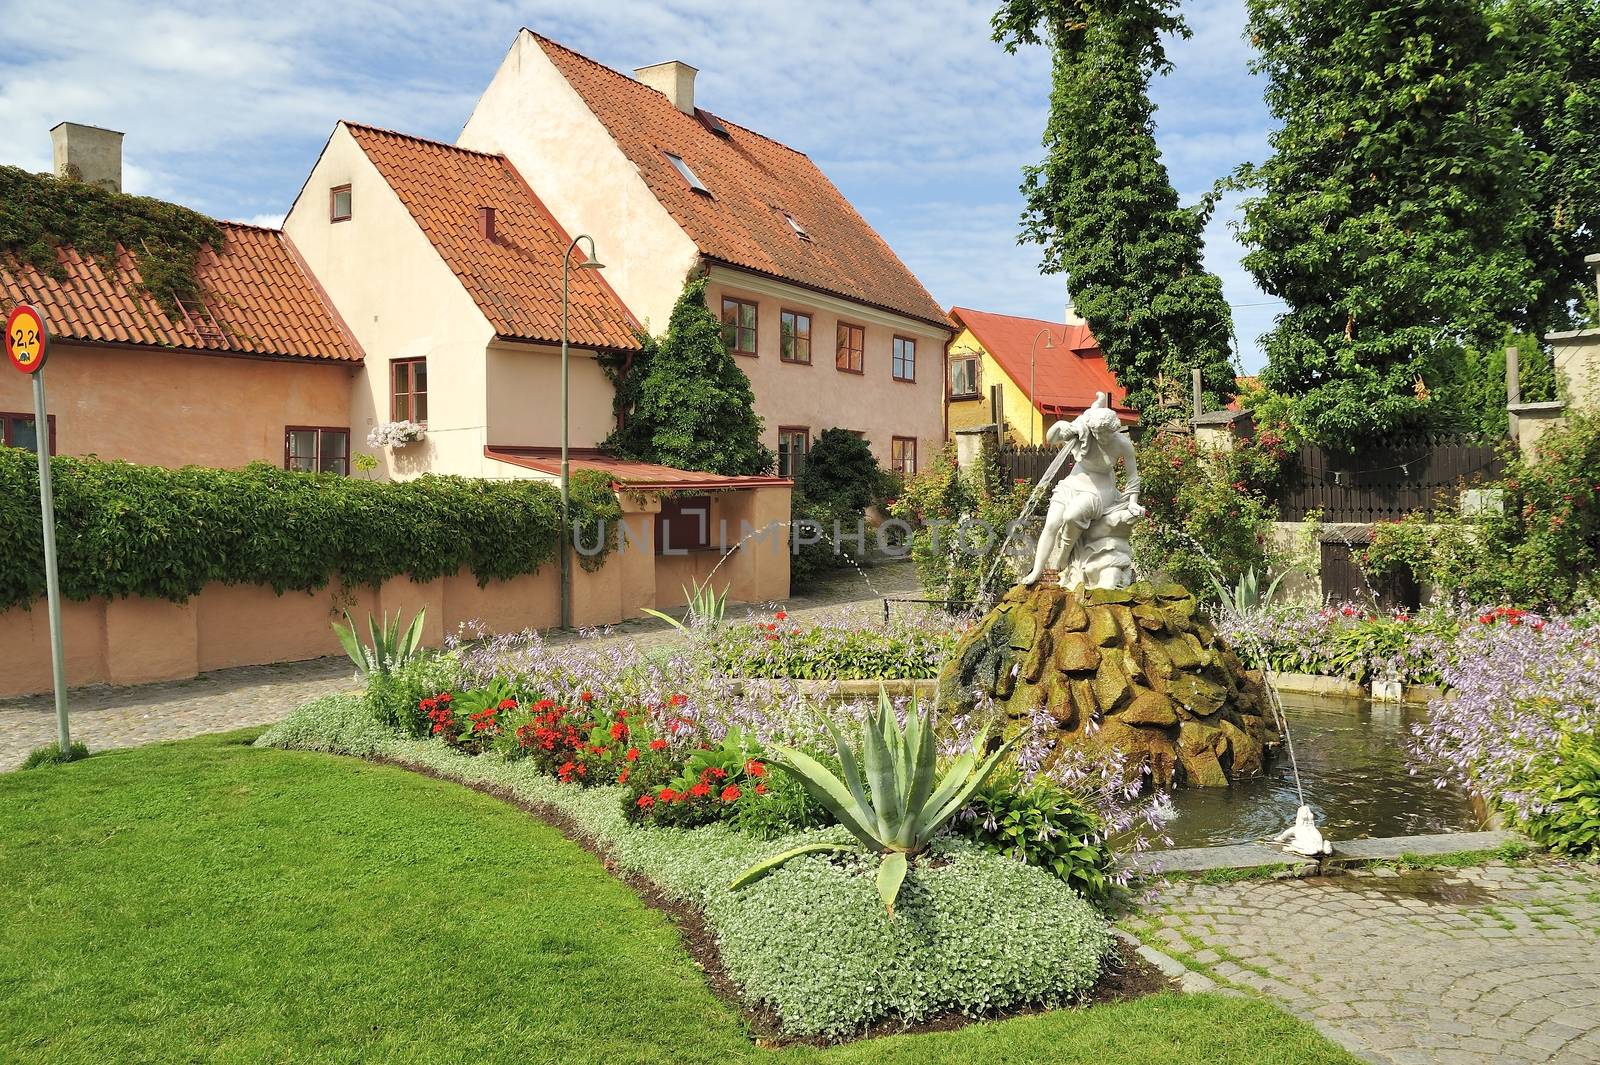 Packhusplan, is a square in Visby, at the end of the 1800s prepared a small plantation with a fountain and the bronze sculpture cornucopia goddess.